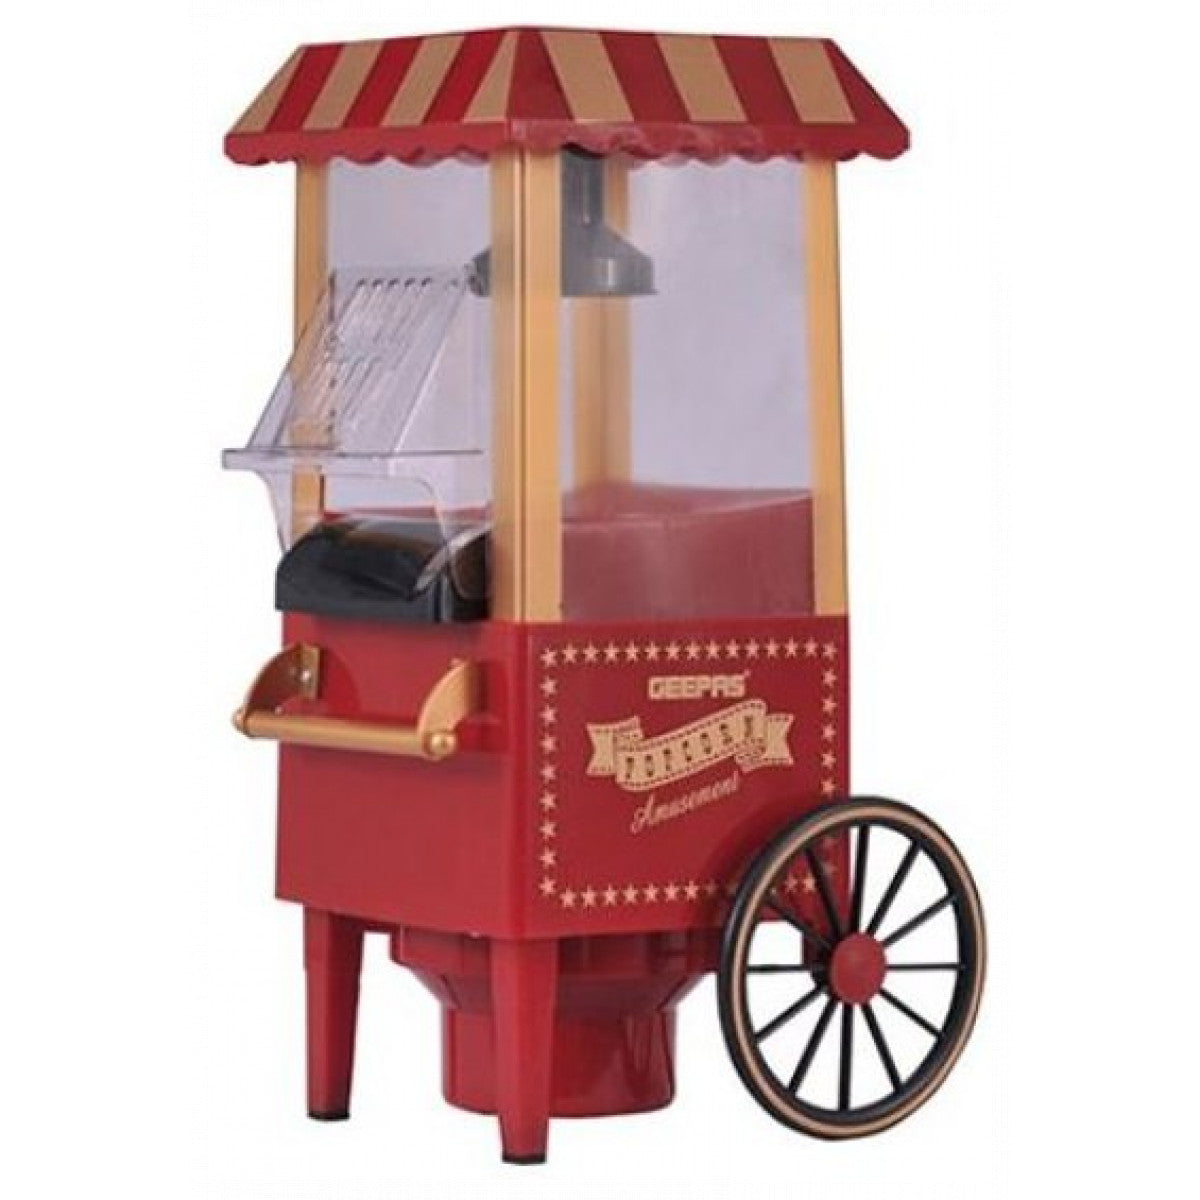 Geepas GPM830 - Traditional Type Popcorn Maker